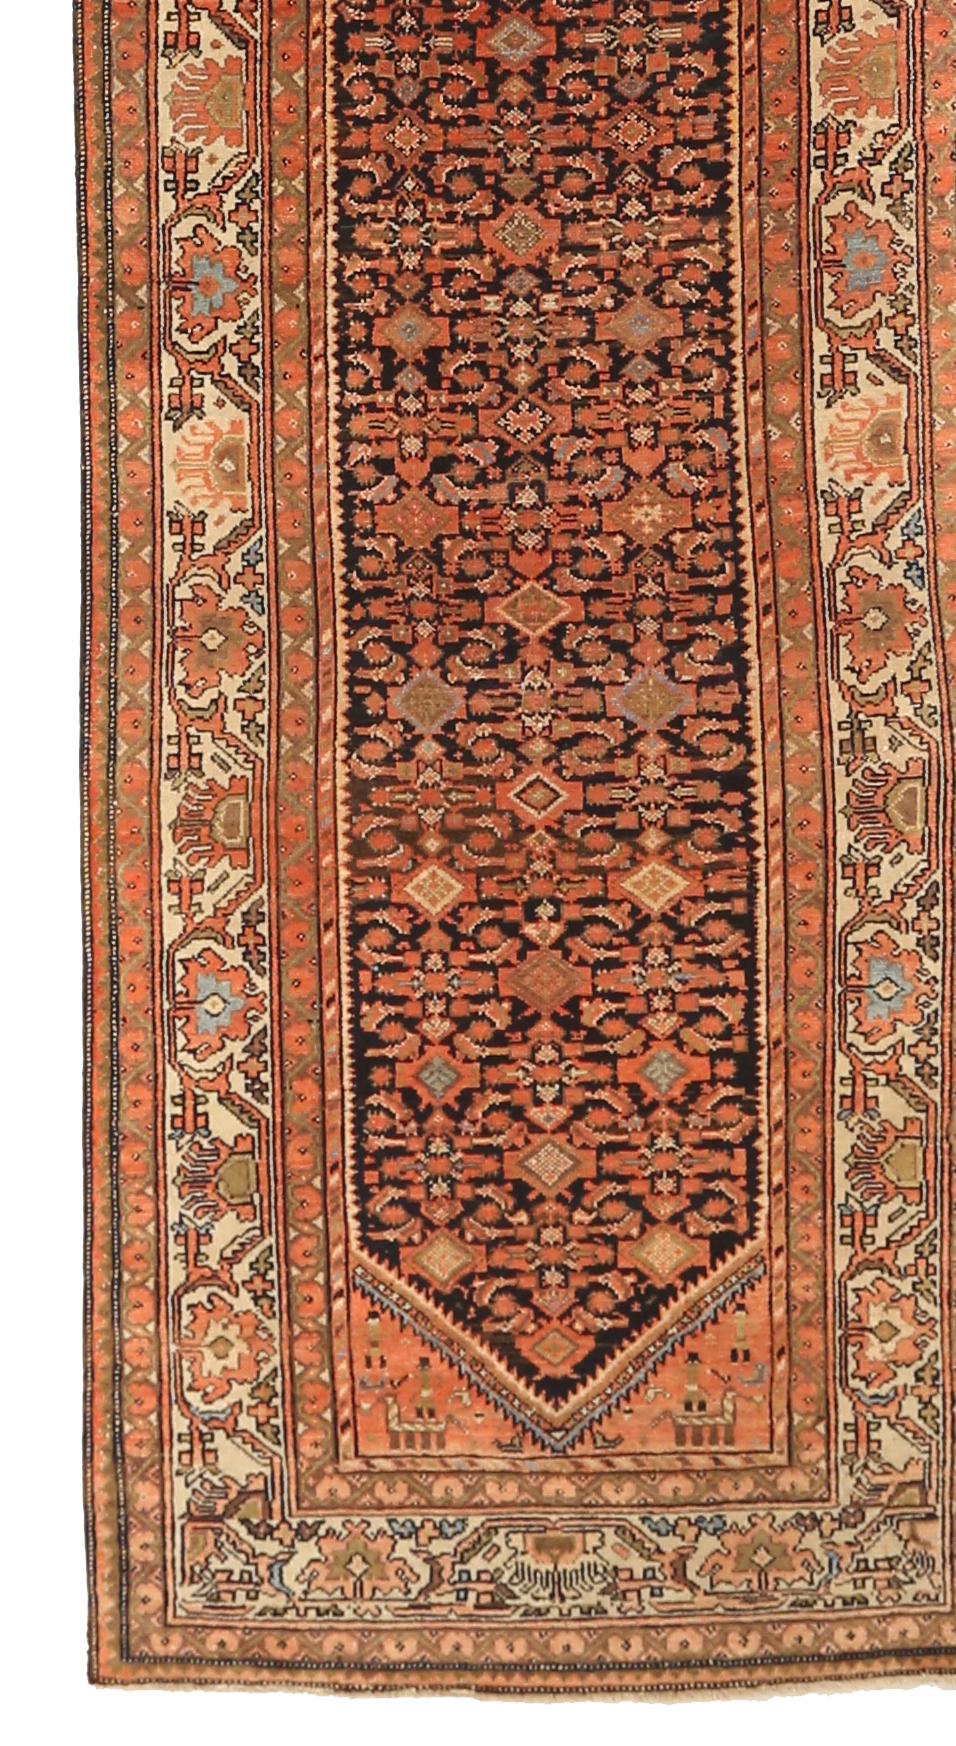 Hand-Woven Antique Handwoven Persian Runner Rug Malayer Design For Sale